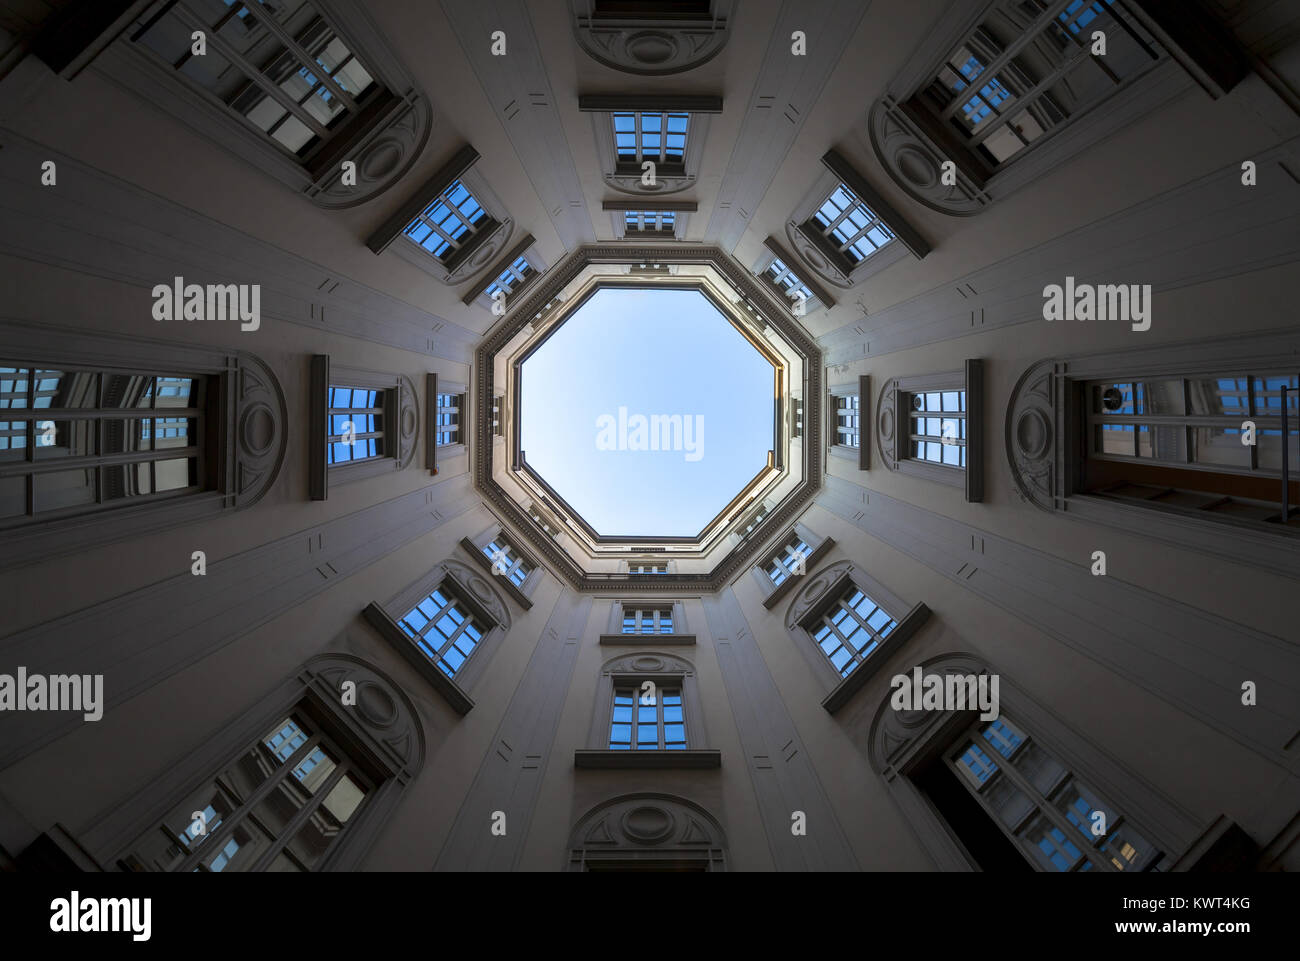 Italy, Milan. Interior of an old palace, looking to the sky with a wide 16mm lens. Stock Photo